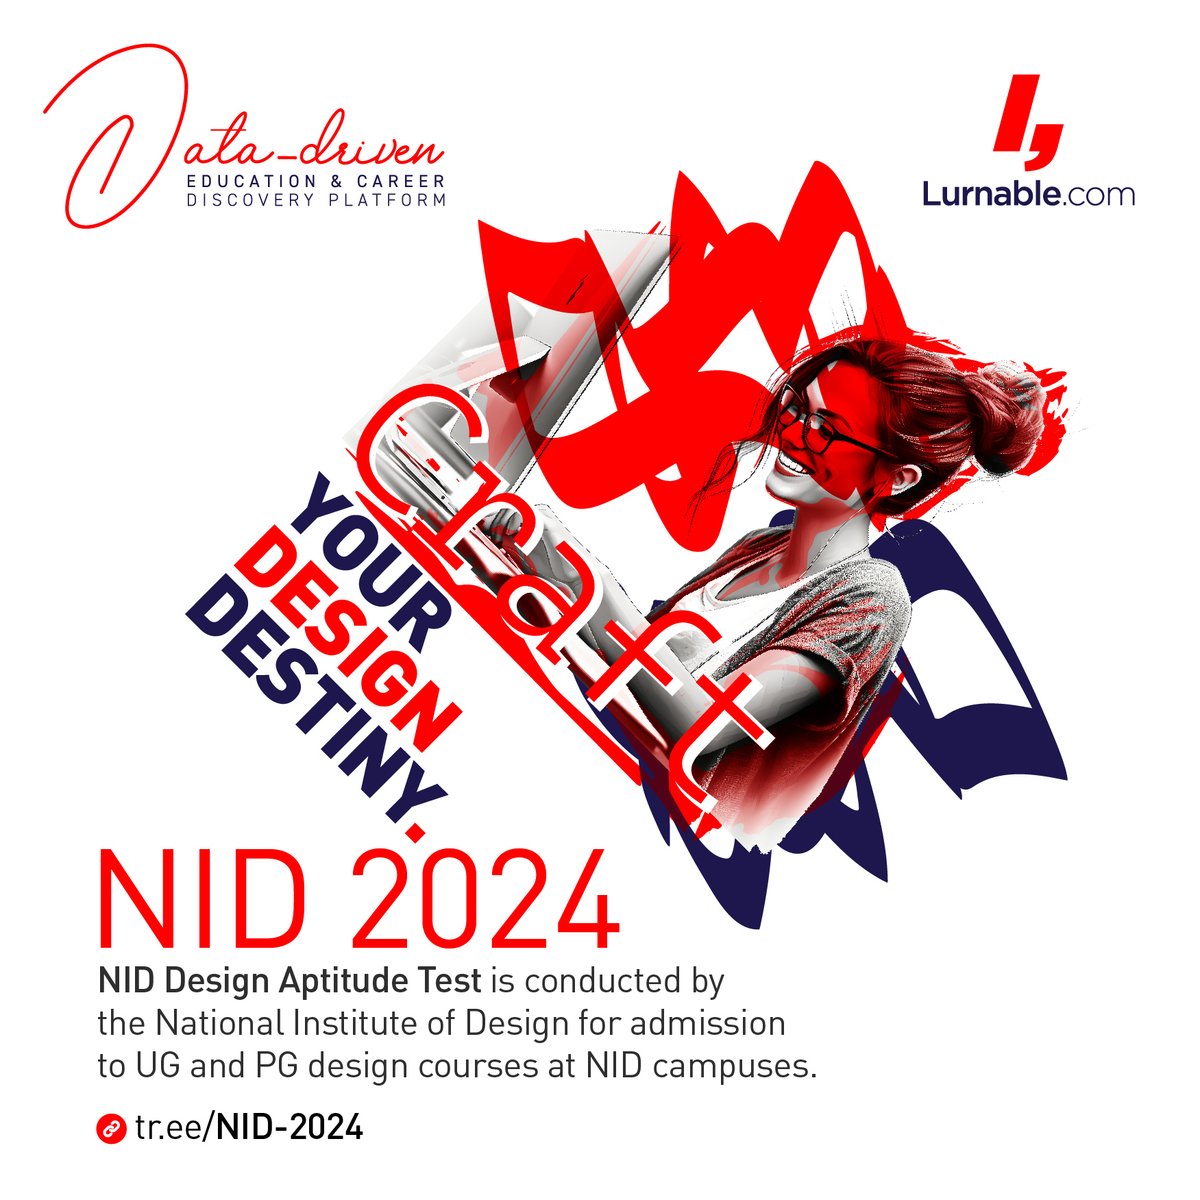 NID Design Aptitude Test is conducted by the National Institute of Design for admission to UG and PG design courses at NID campuses. Read more: tr.ee/NID-2024 

#nid #nid2024 #nidexam #nationalinstituteofdesign #nidahmedabad #design #exams #learning